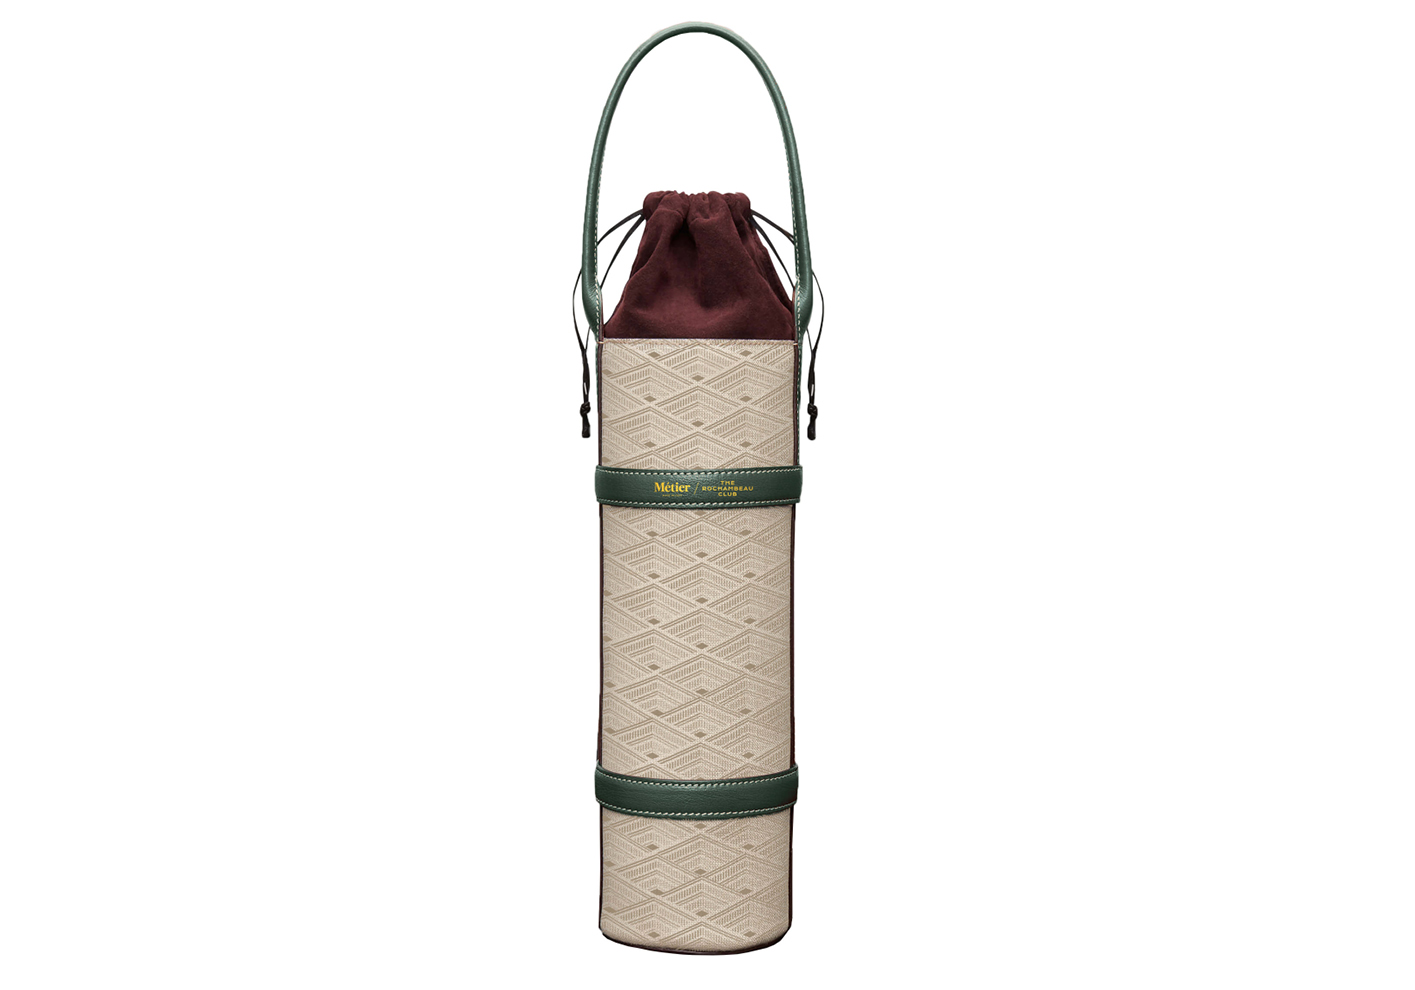 The “Bring a Bottle” wine carrier, £550